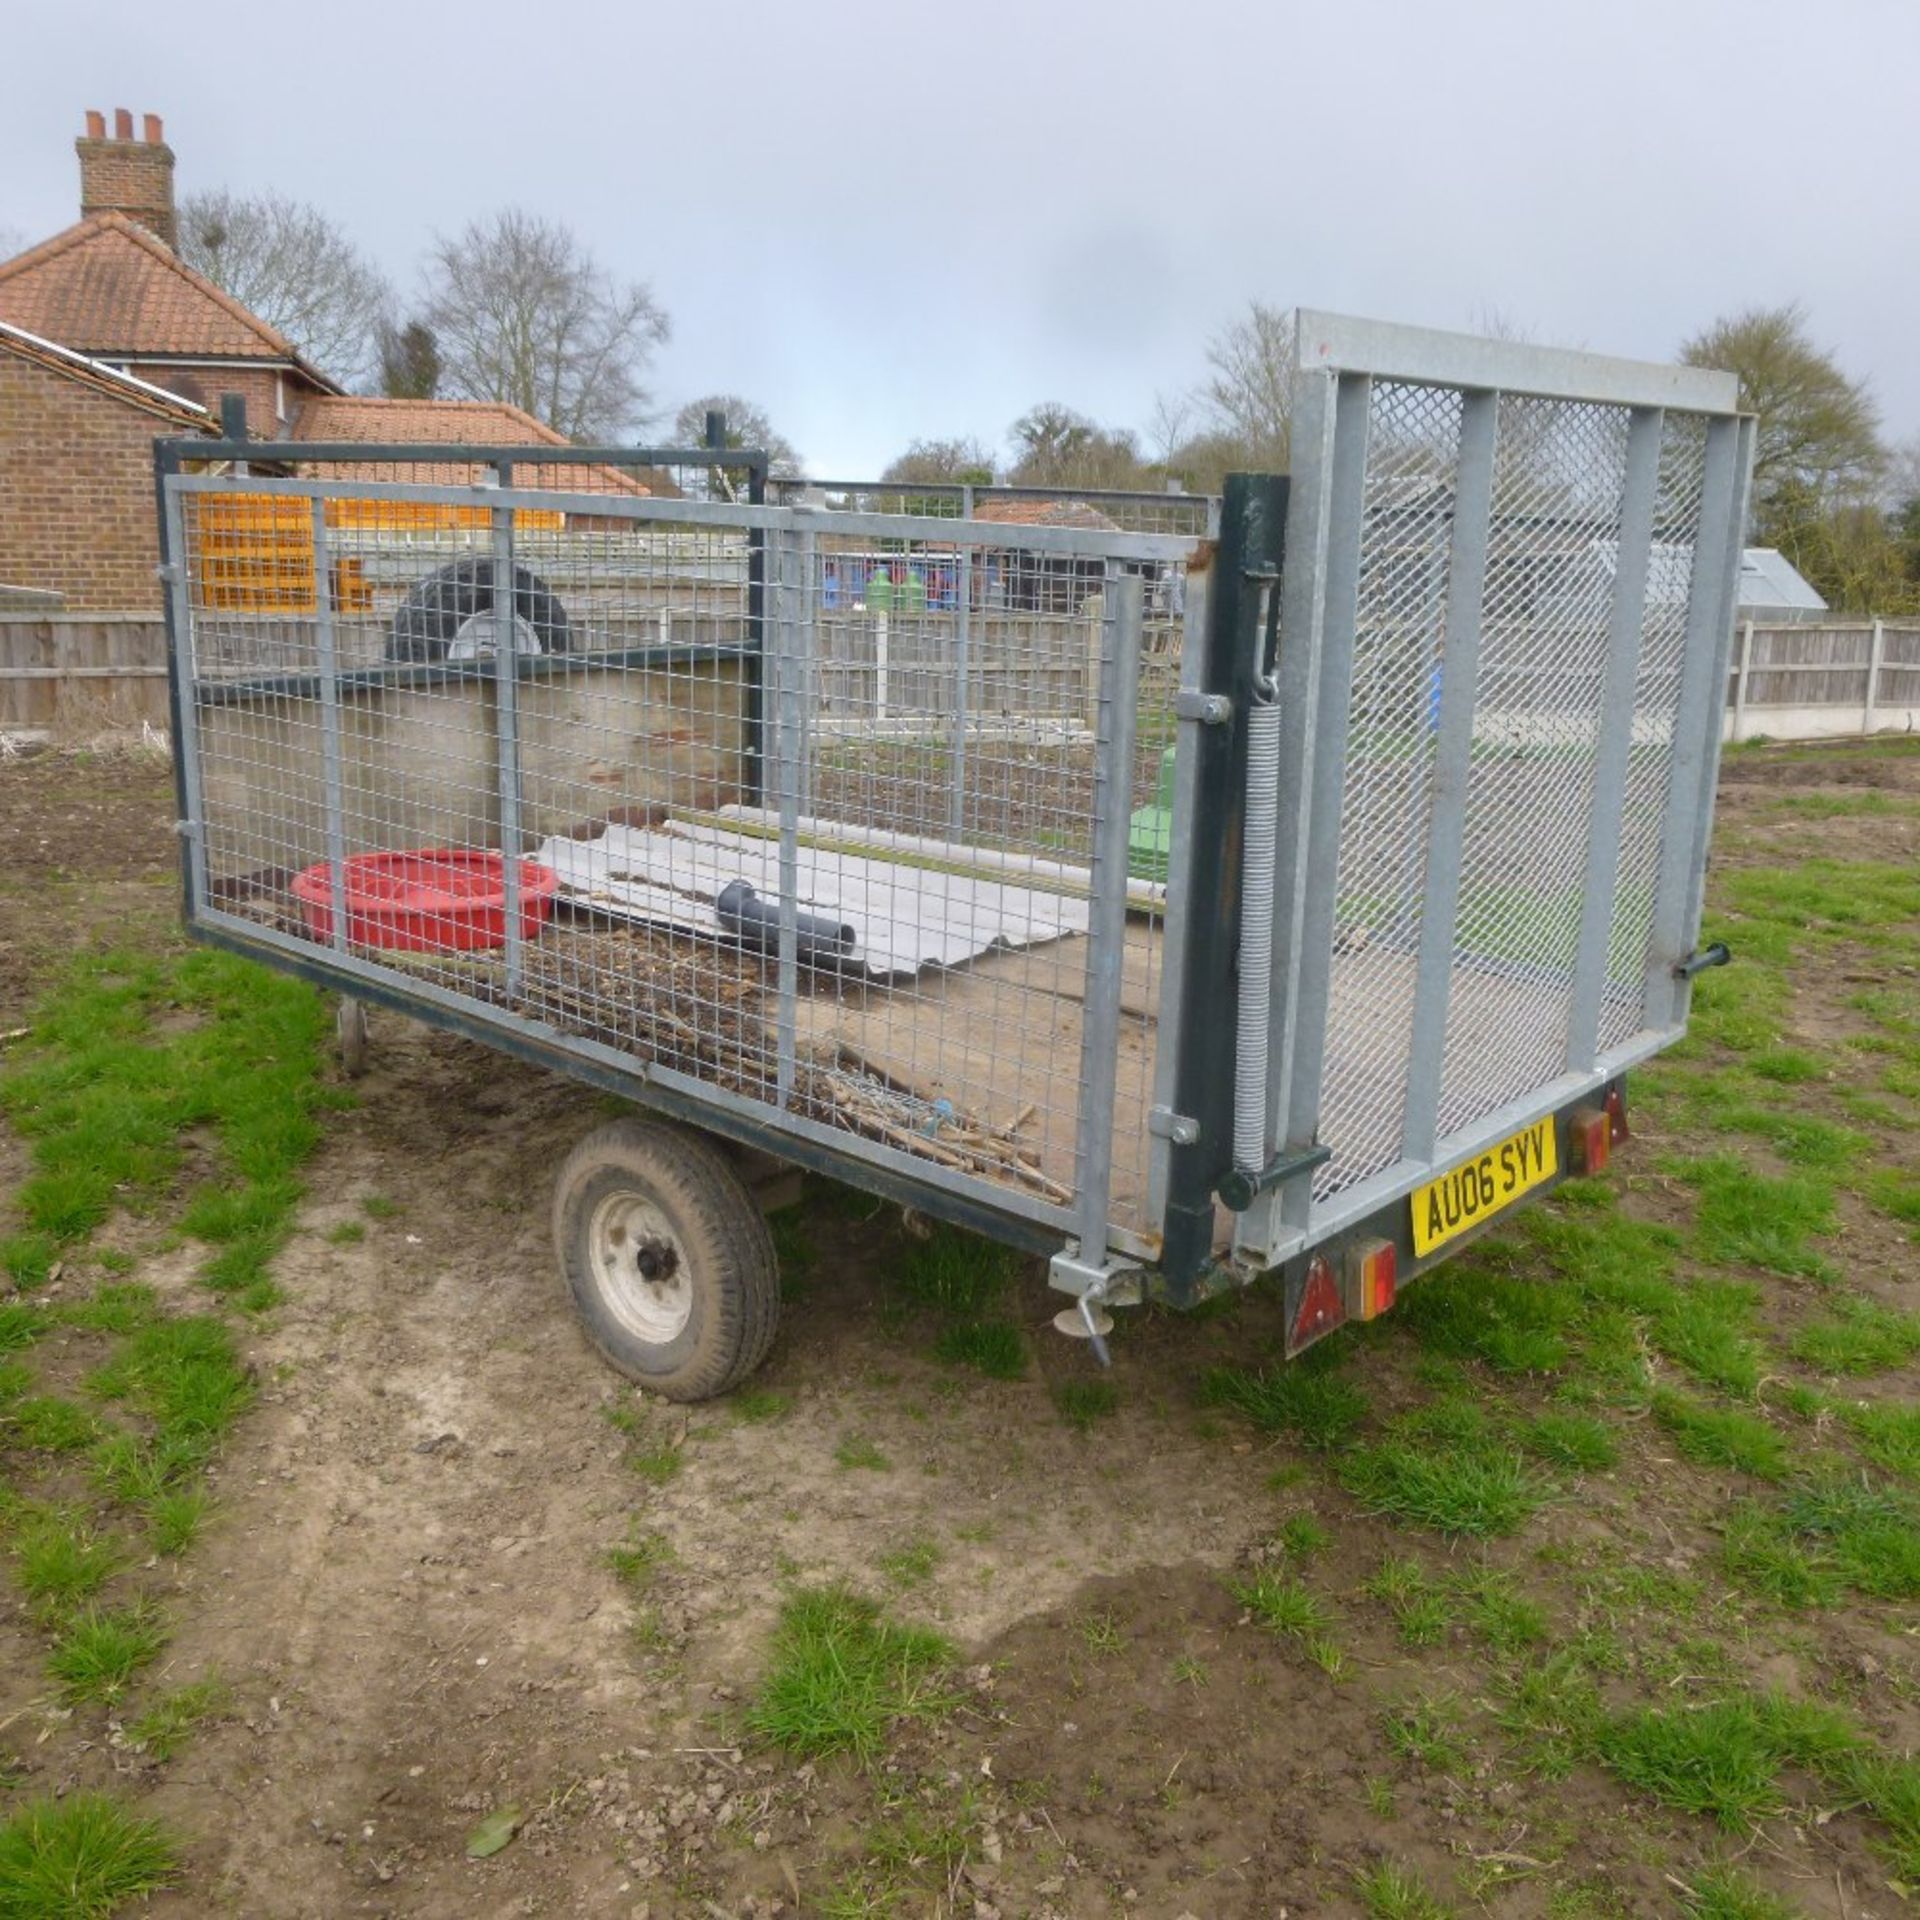 2 Wheel cage trailer 8'9" x 5'9". No VAT on this lot.